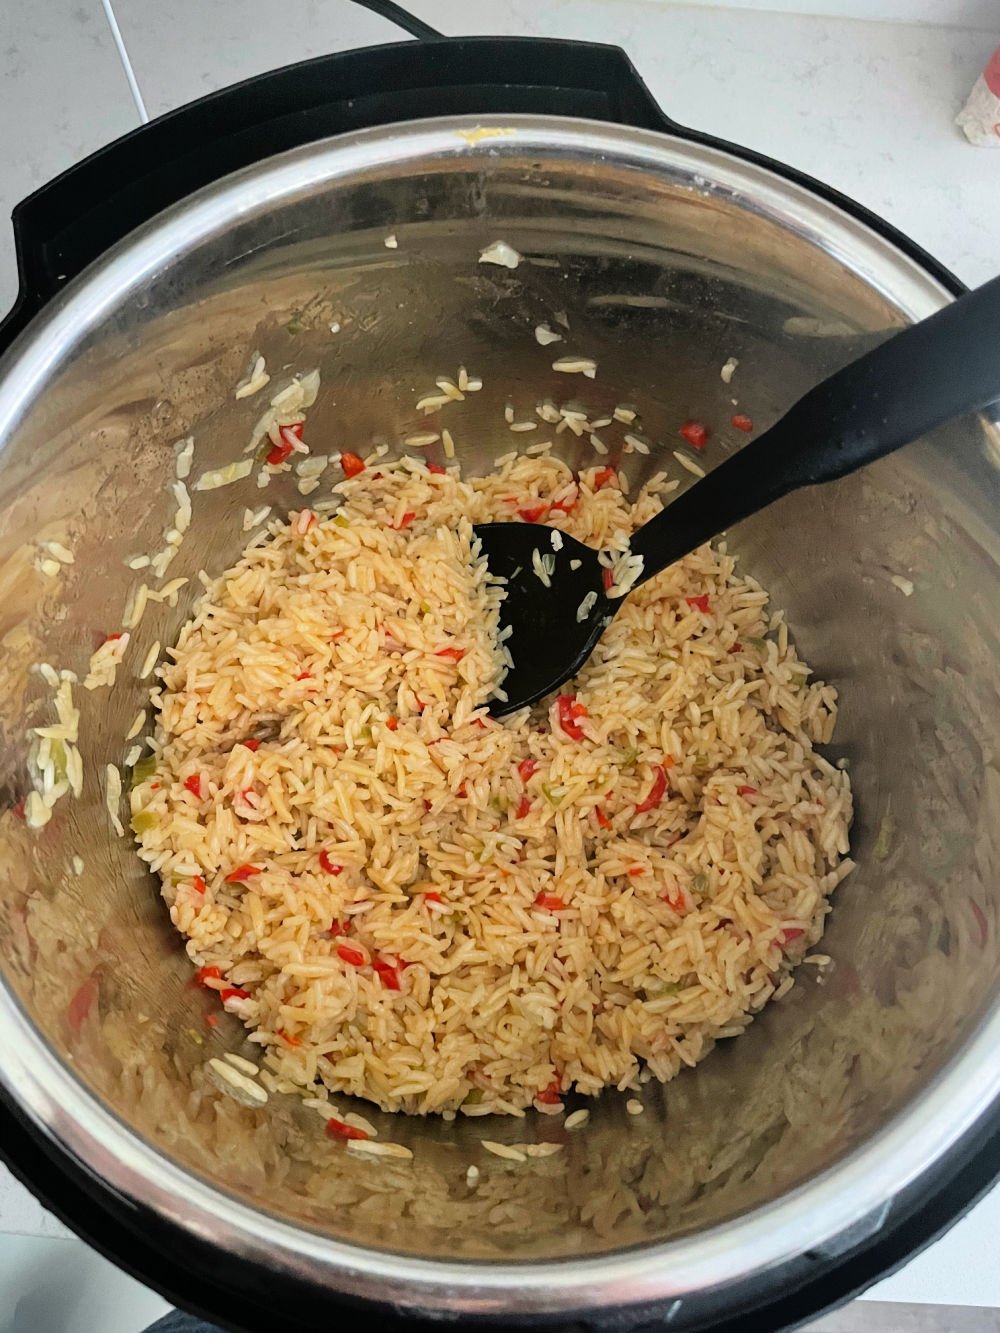 Fluffy rice pilaf after cooking in the Instant Pot